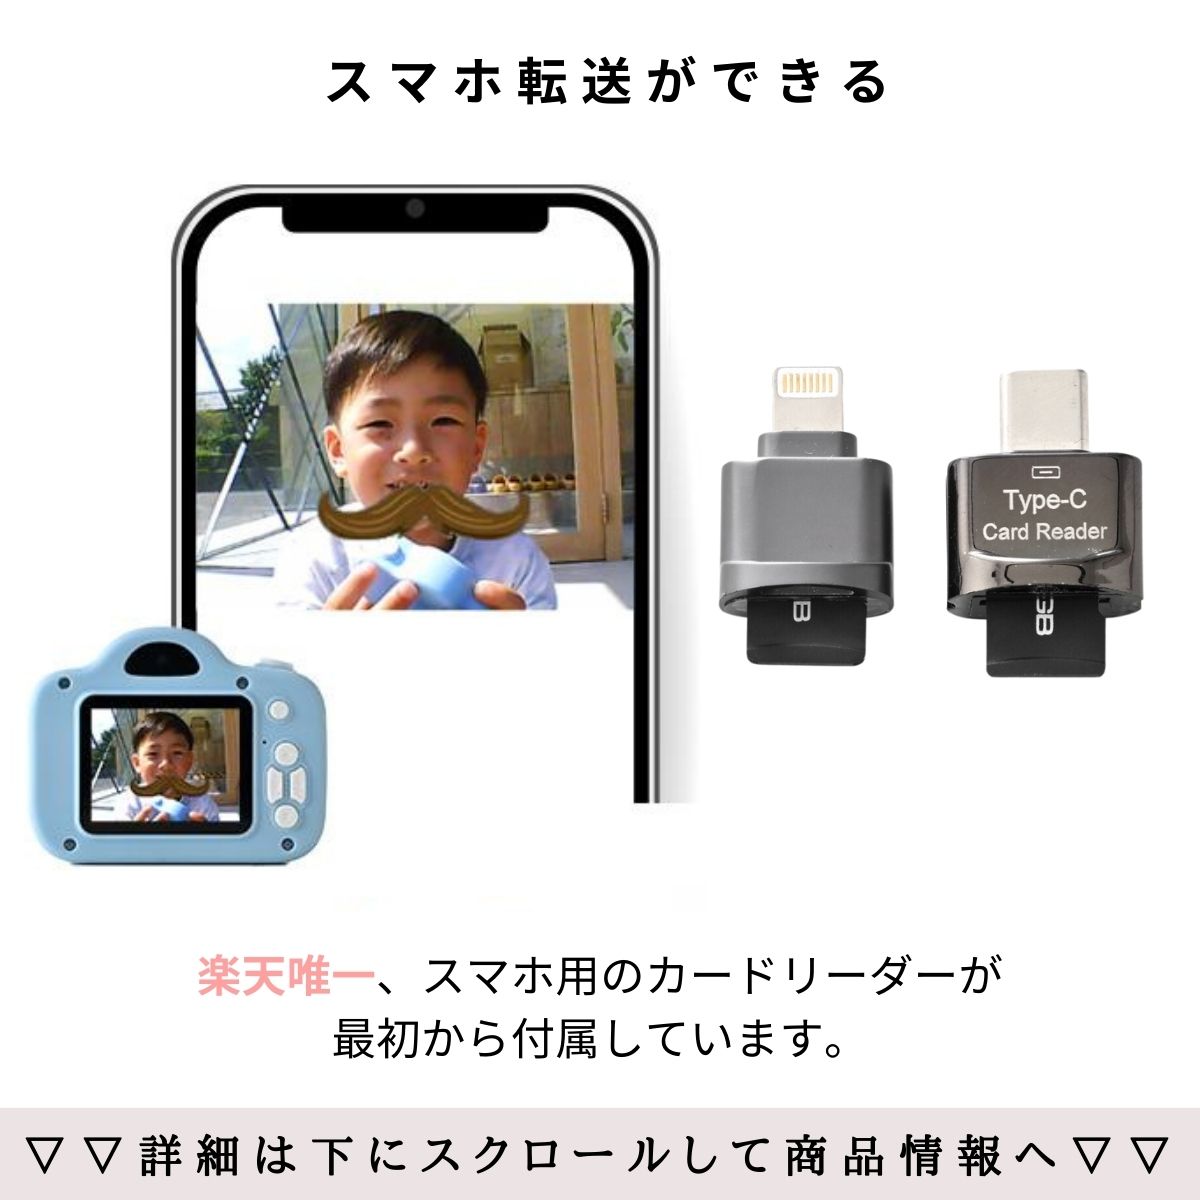  Japan enterprise . plan sale safety guarantee Kids camera for children camera Mini pik toy camera smartphone transfer possibility SD card attaching game function less 